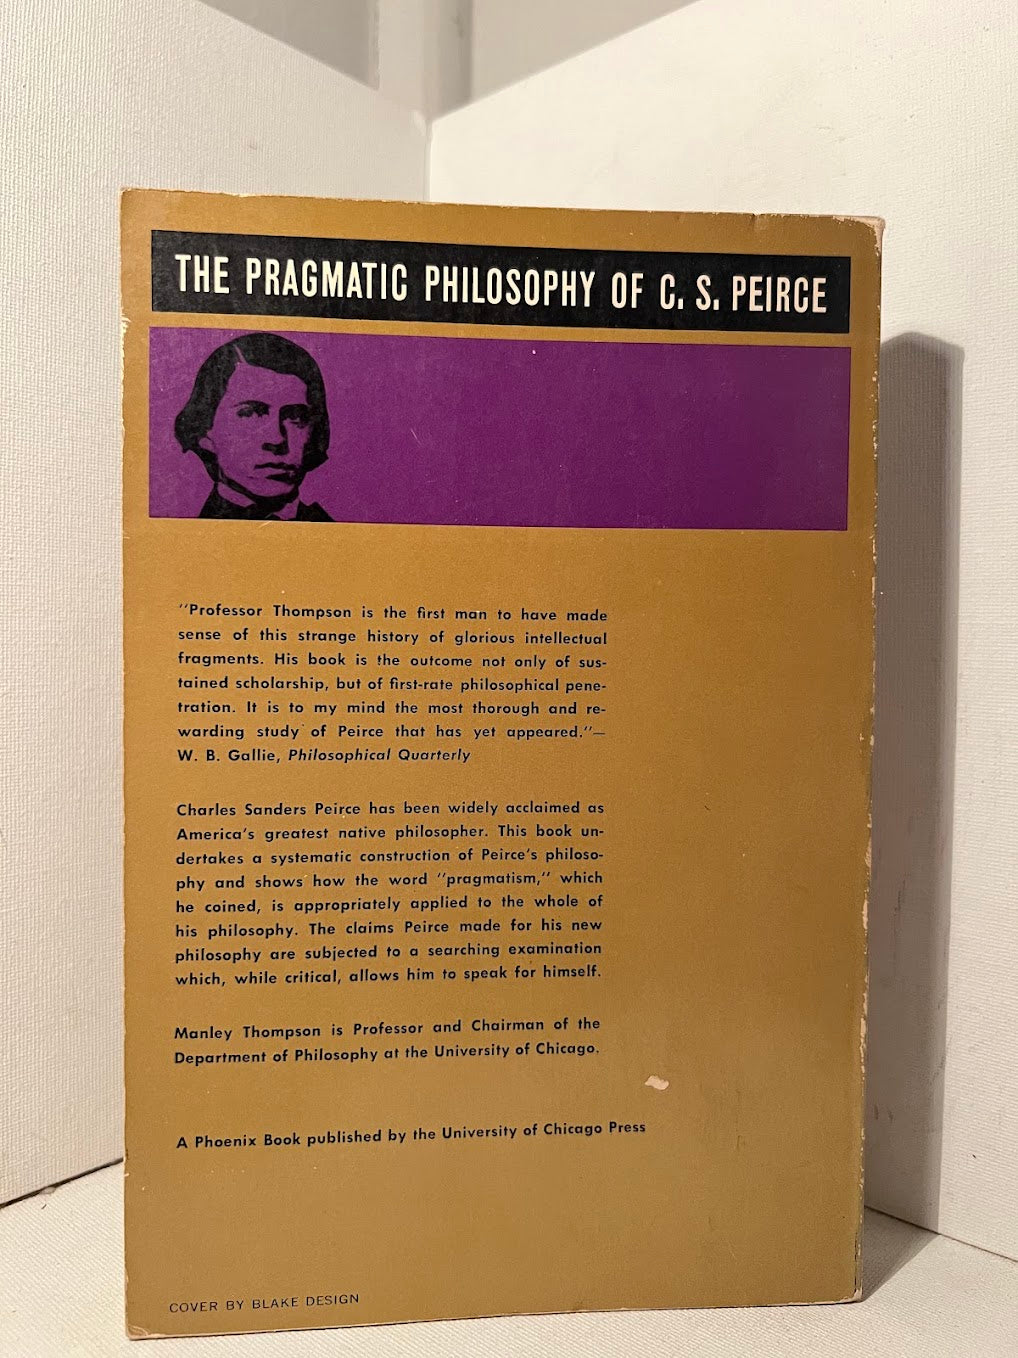 The Pragmatic Philosophy of C.S. Peirce by Manley Thompson